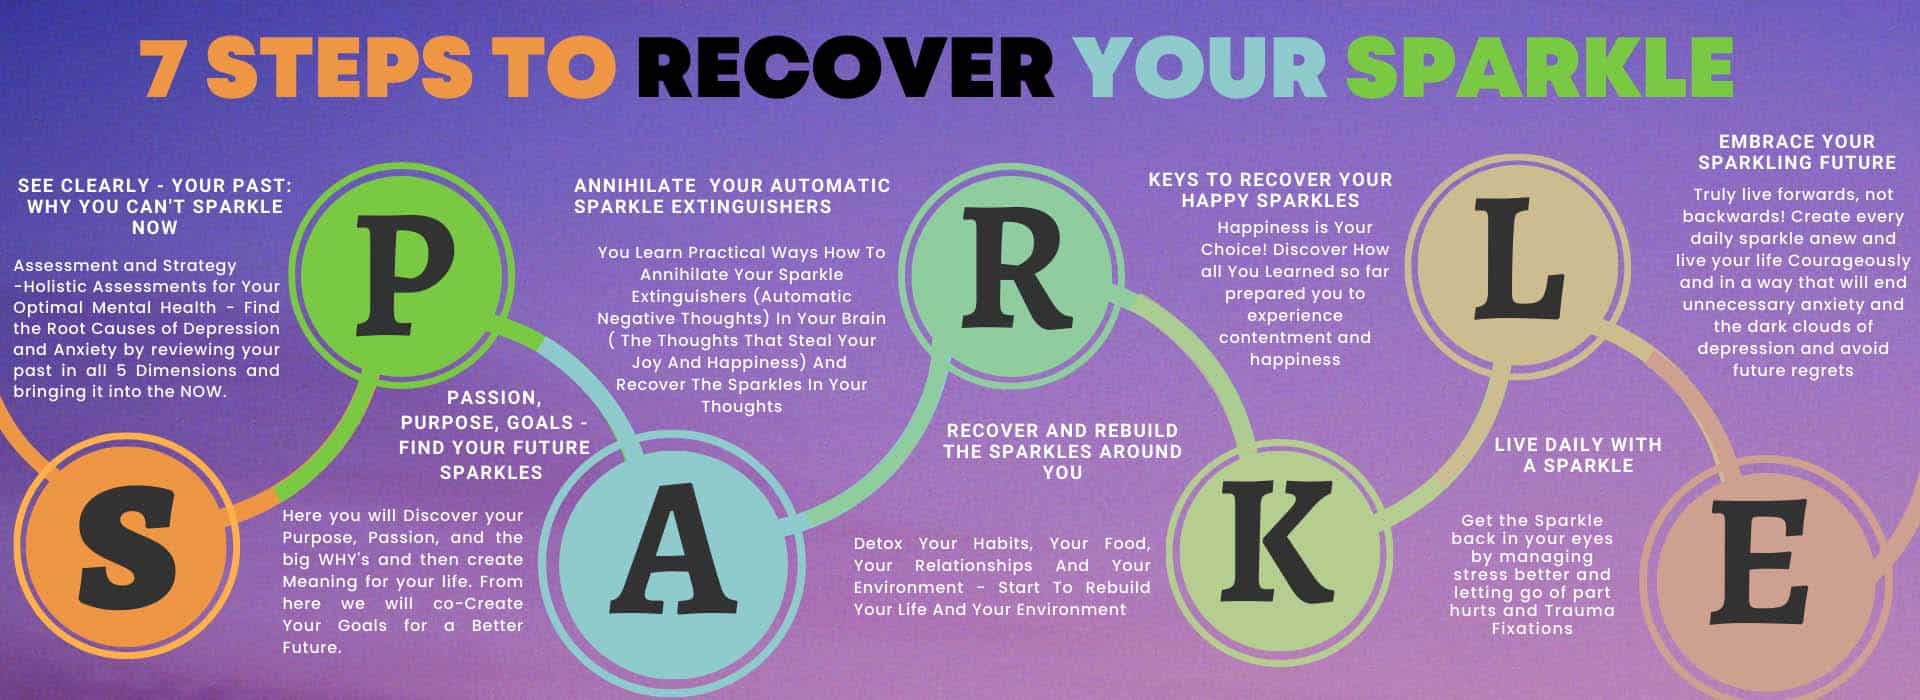 recover your sparkle-heal depression-frustration-stress